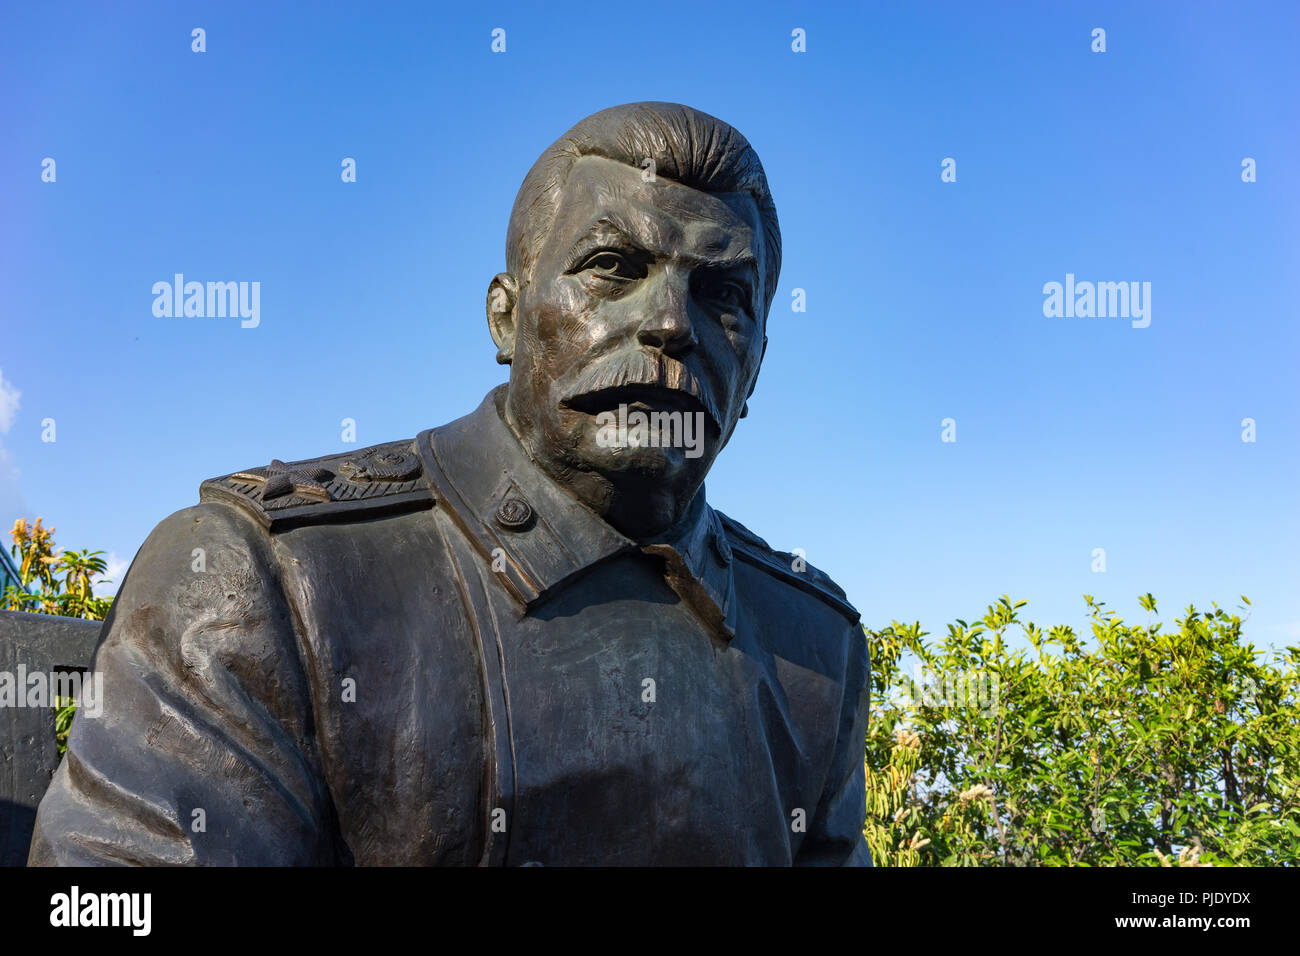 Yalta, Crimea-may 30, 2016: the monument by sculptor Zurab Tsereteli dedicated to the Yalta conference in 1945. Stock Photo